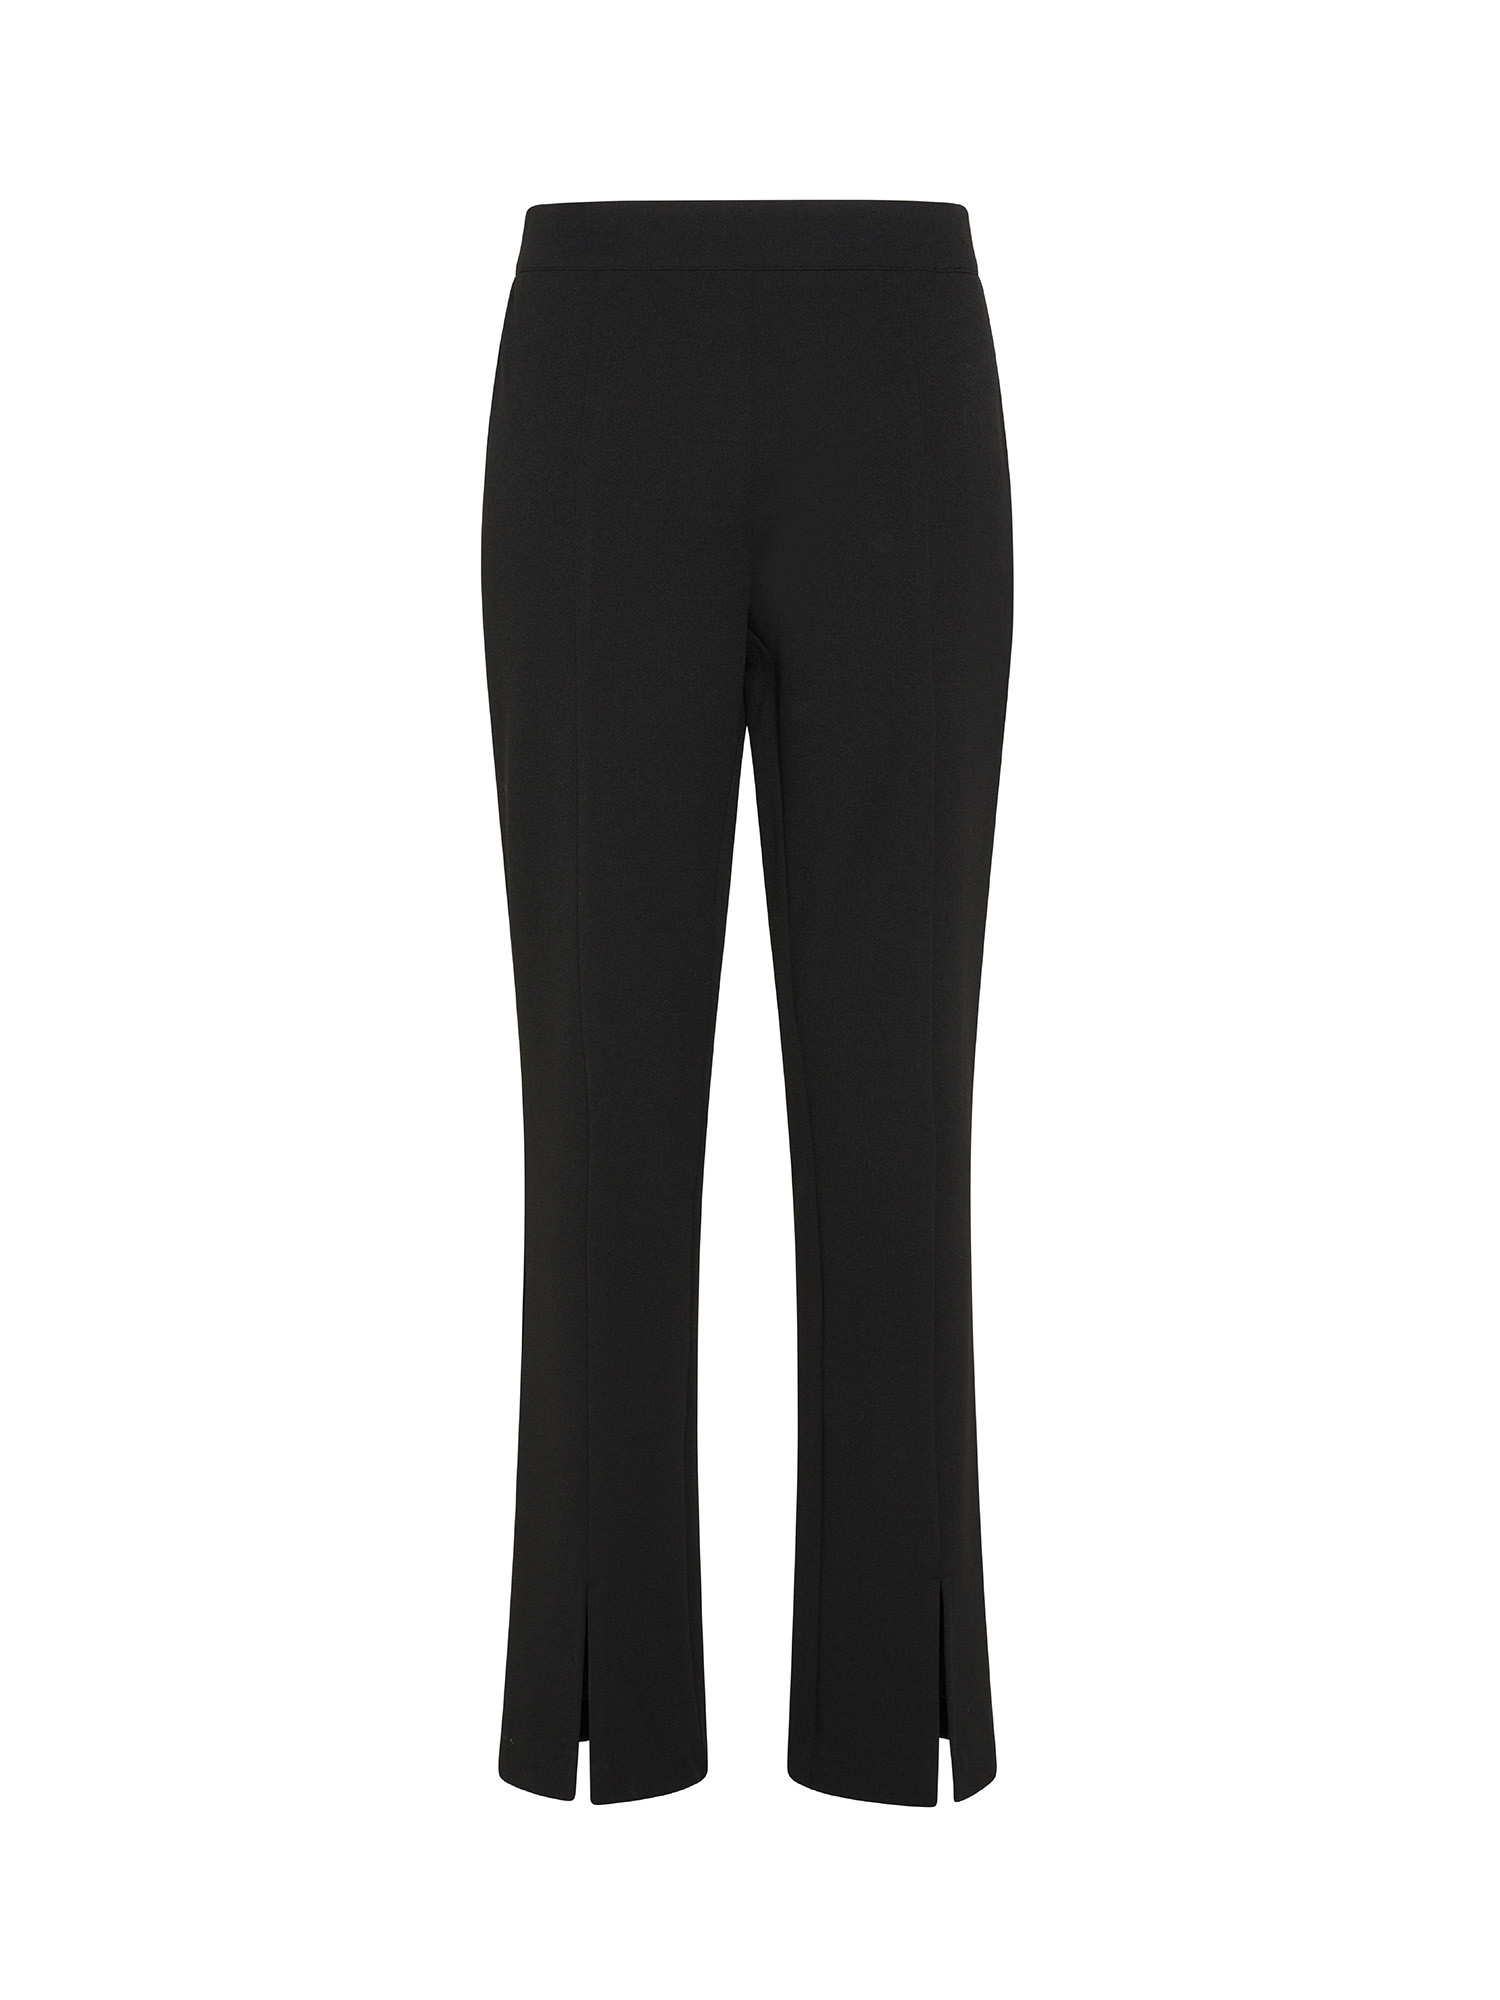 Koan - Crepe trousers with slits, Black, large image number 0